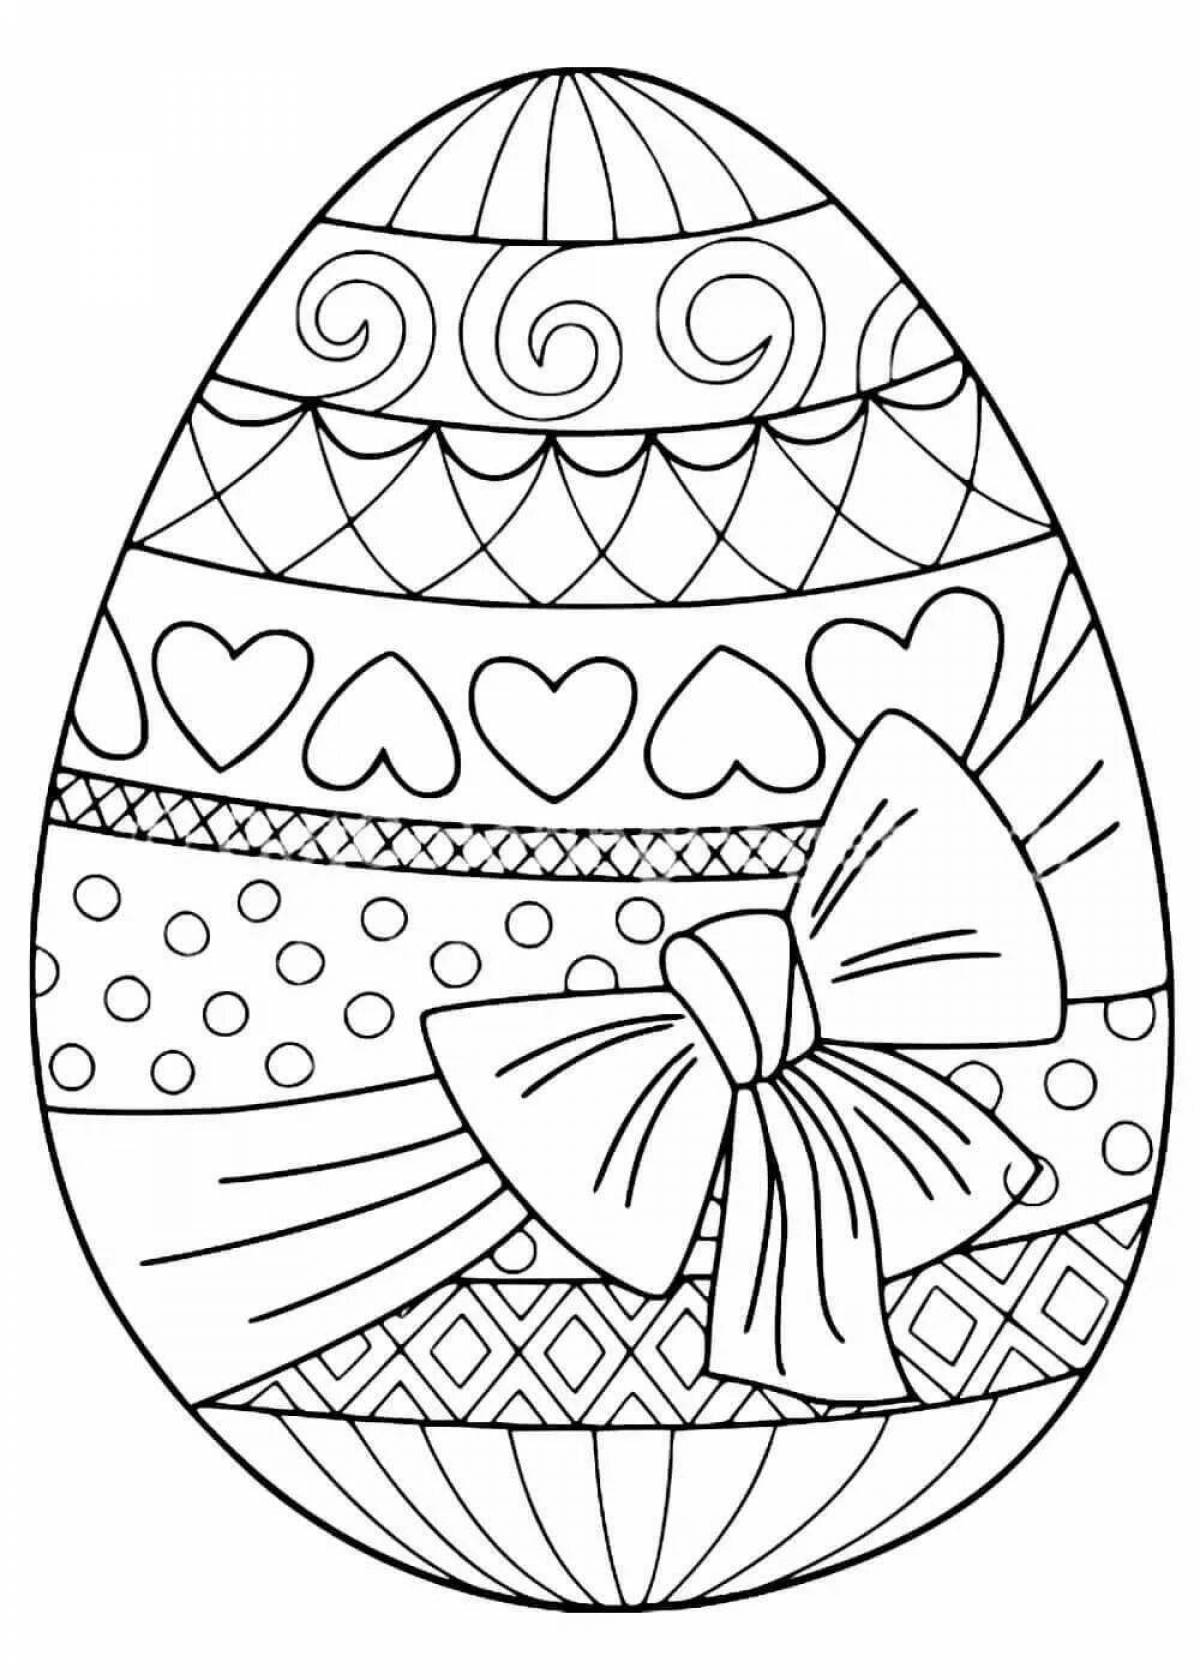 Glorious easter coloring book